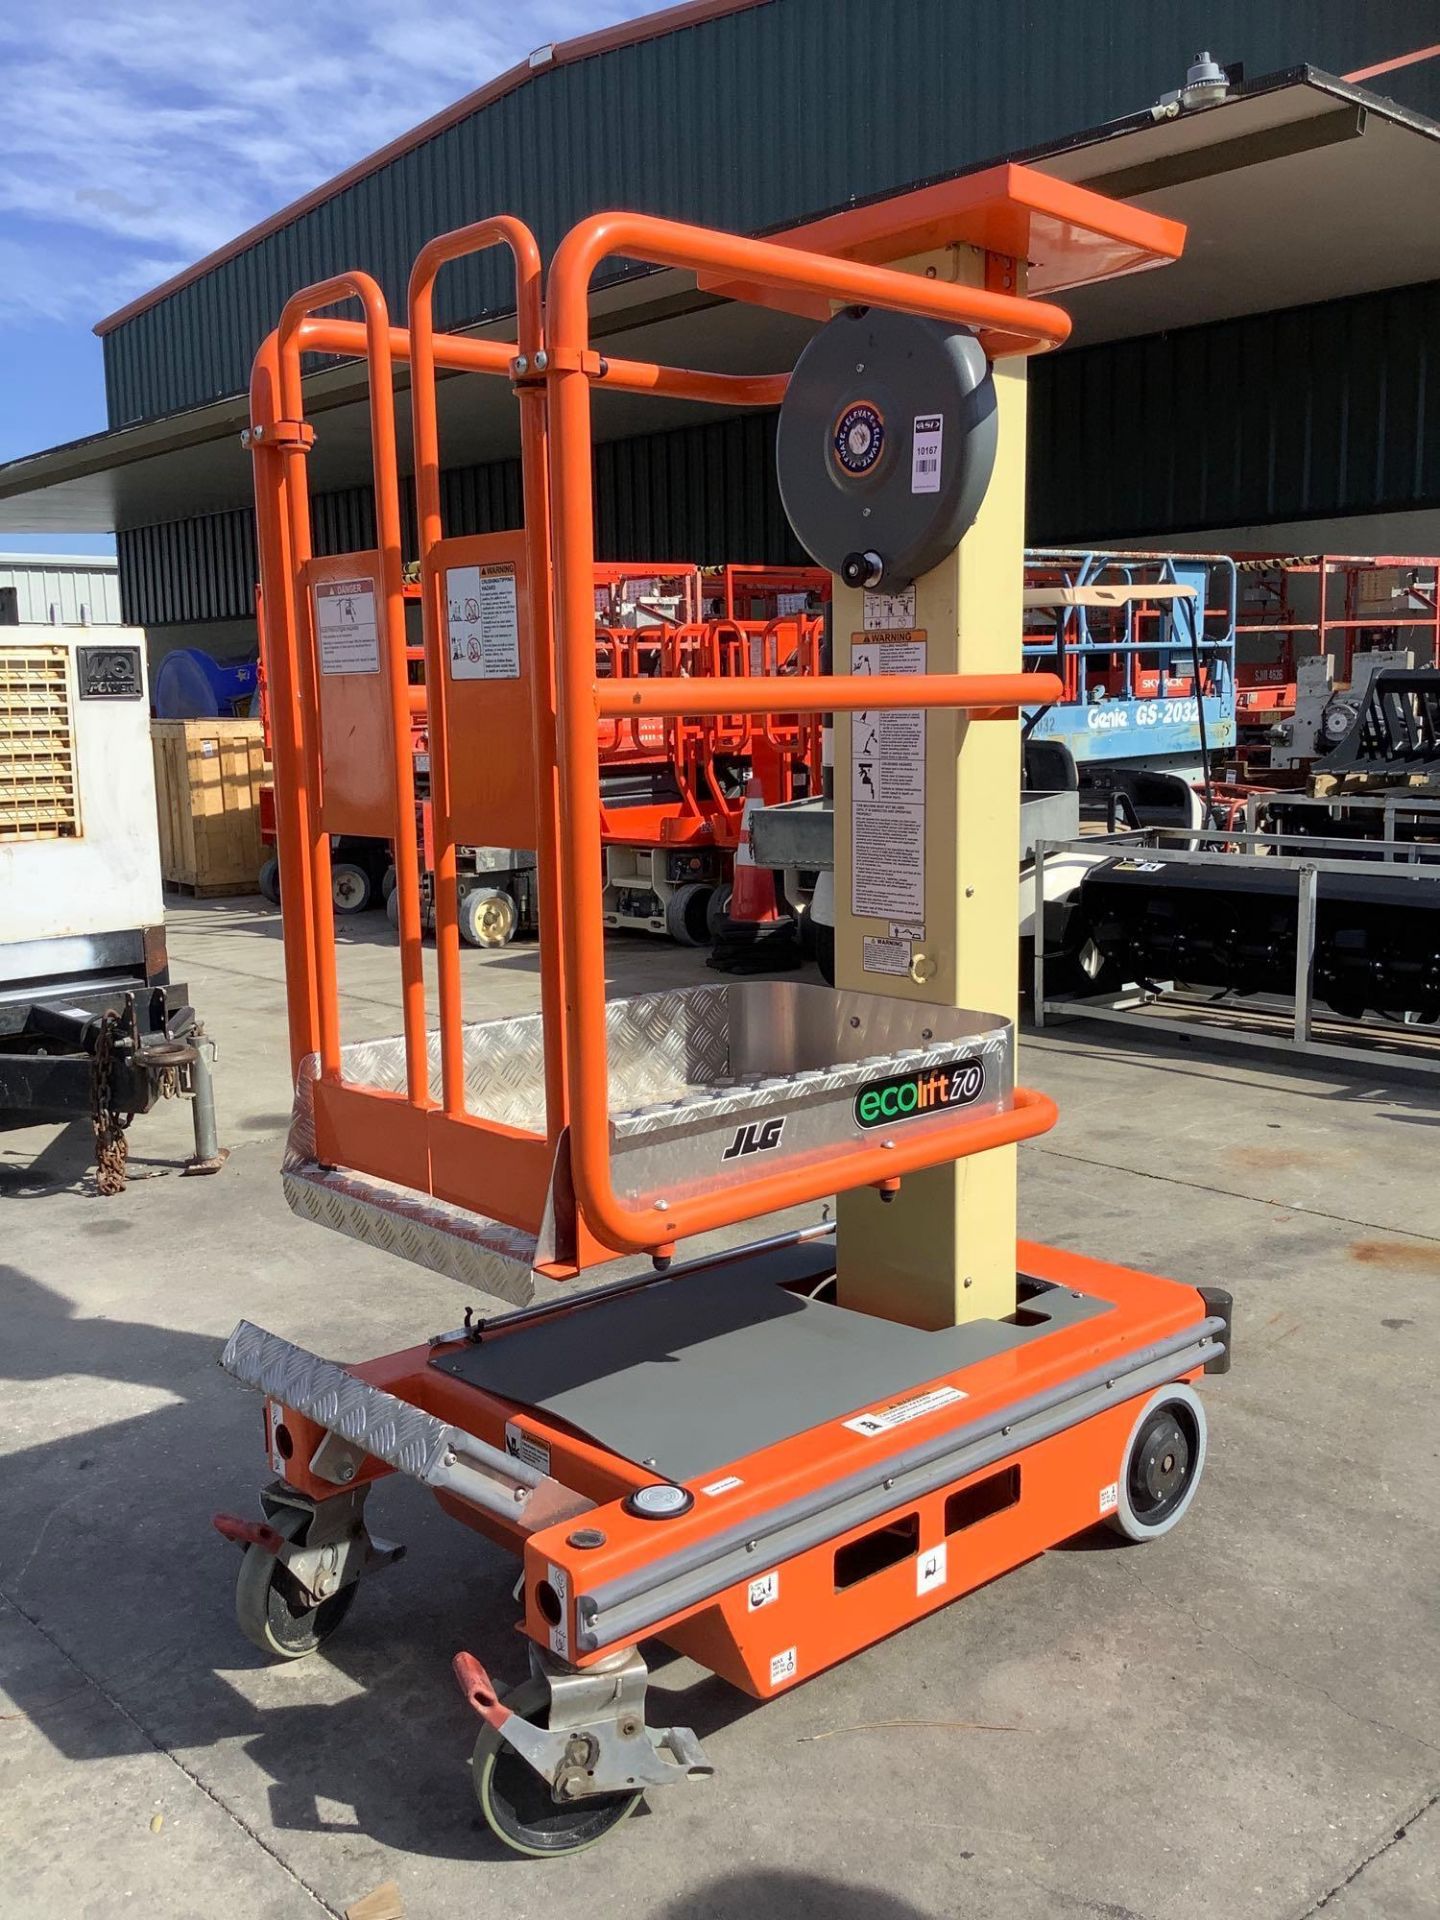 2018 JLG ECOLIFT 70,MANUAL, APPROX MAX PLATFORM HEIGHT 7FT, NON MARKING TIRES - Image 3 of 10